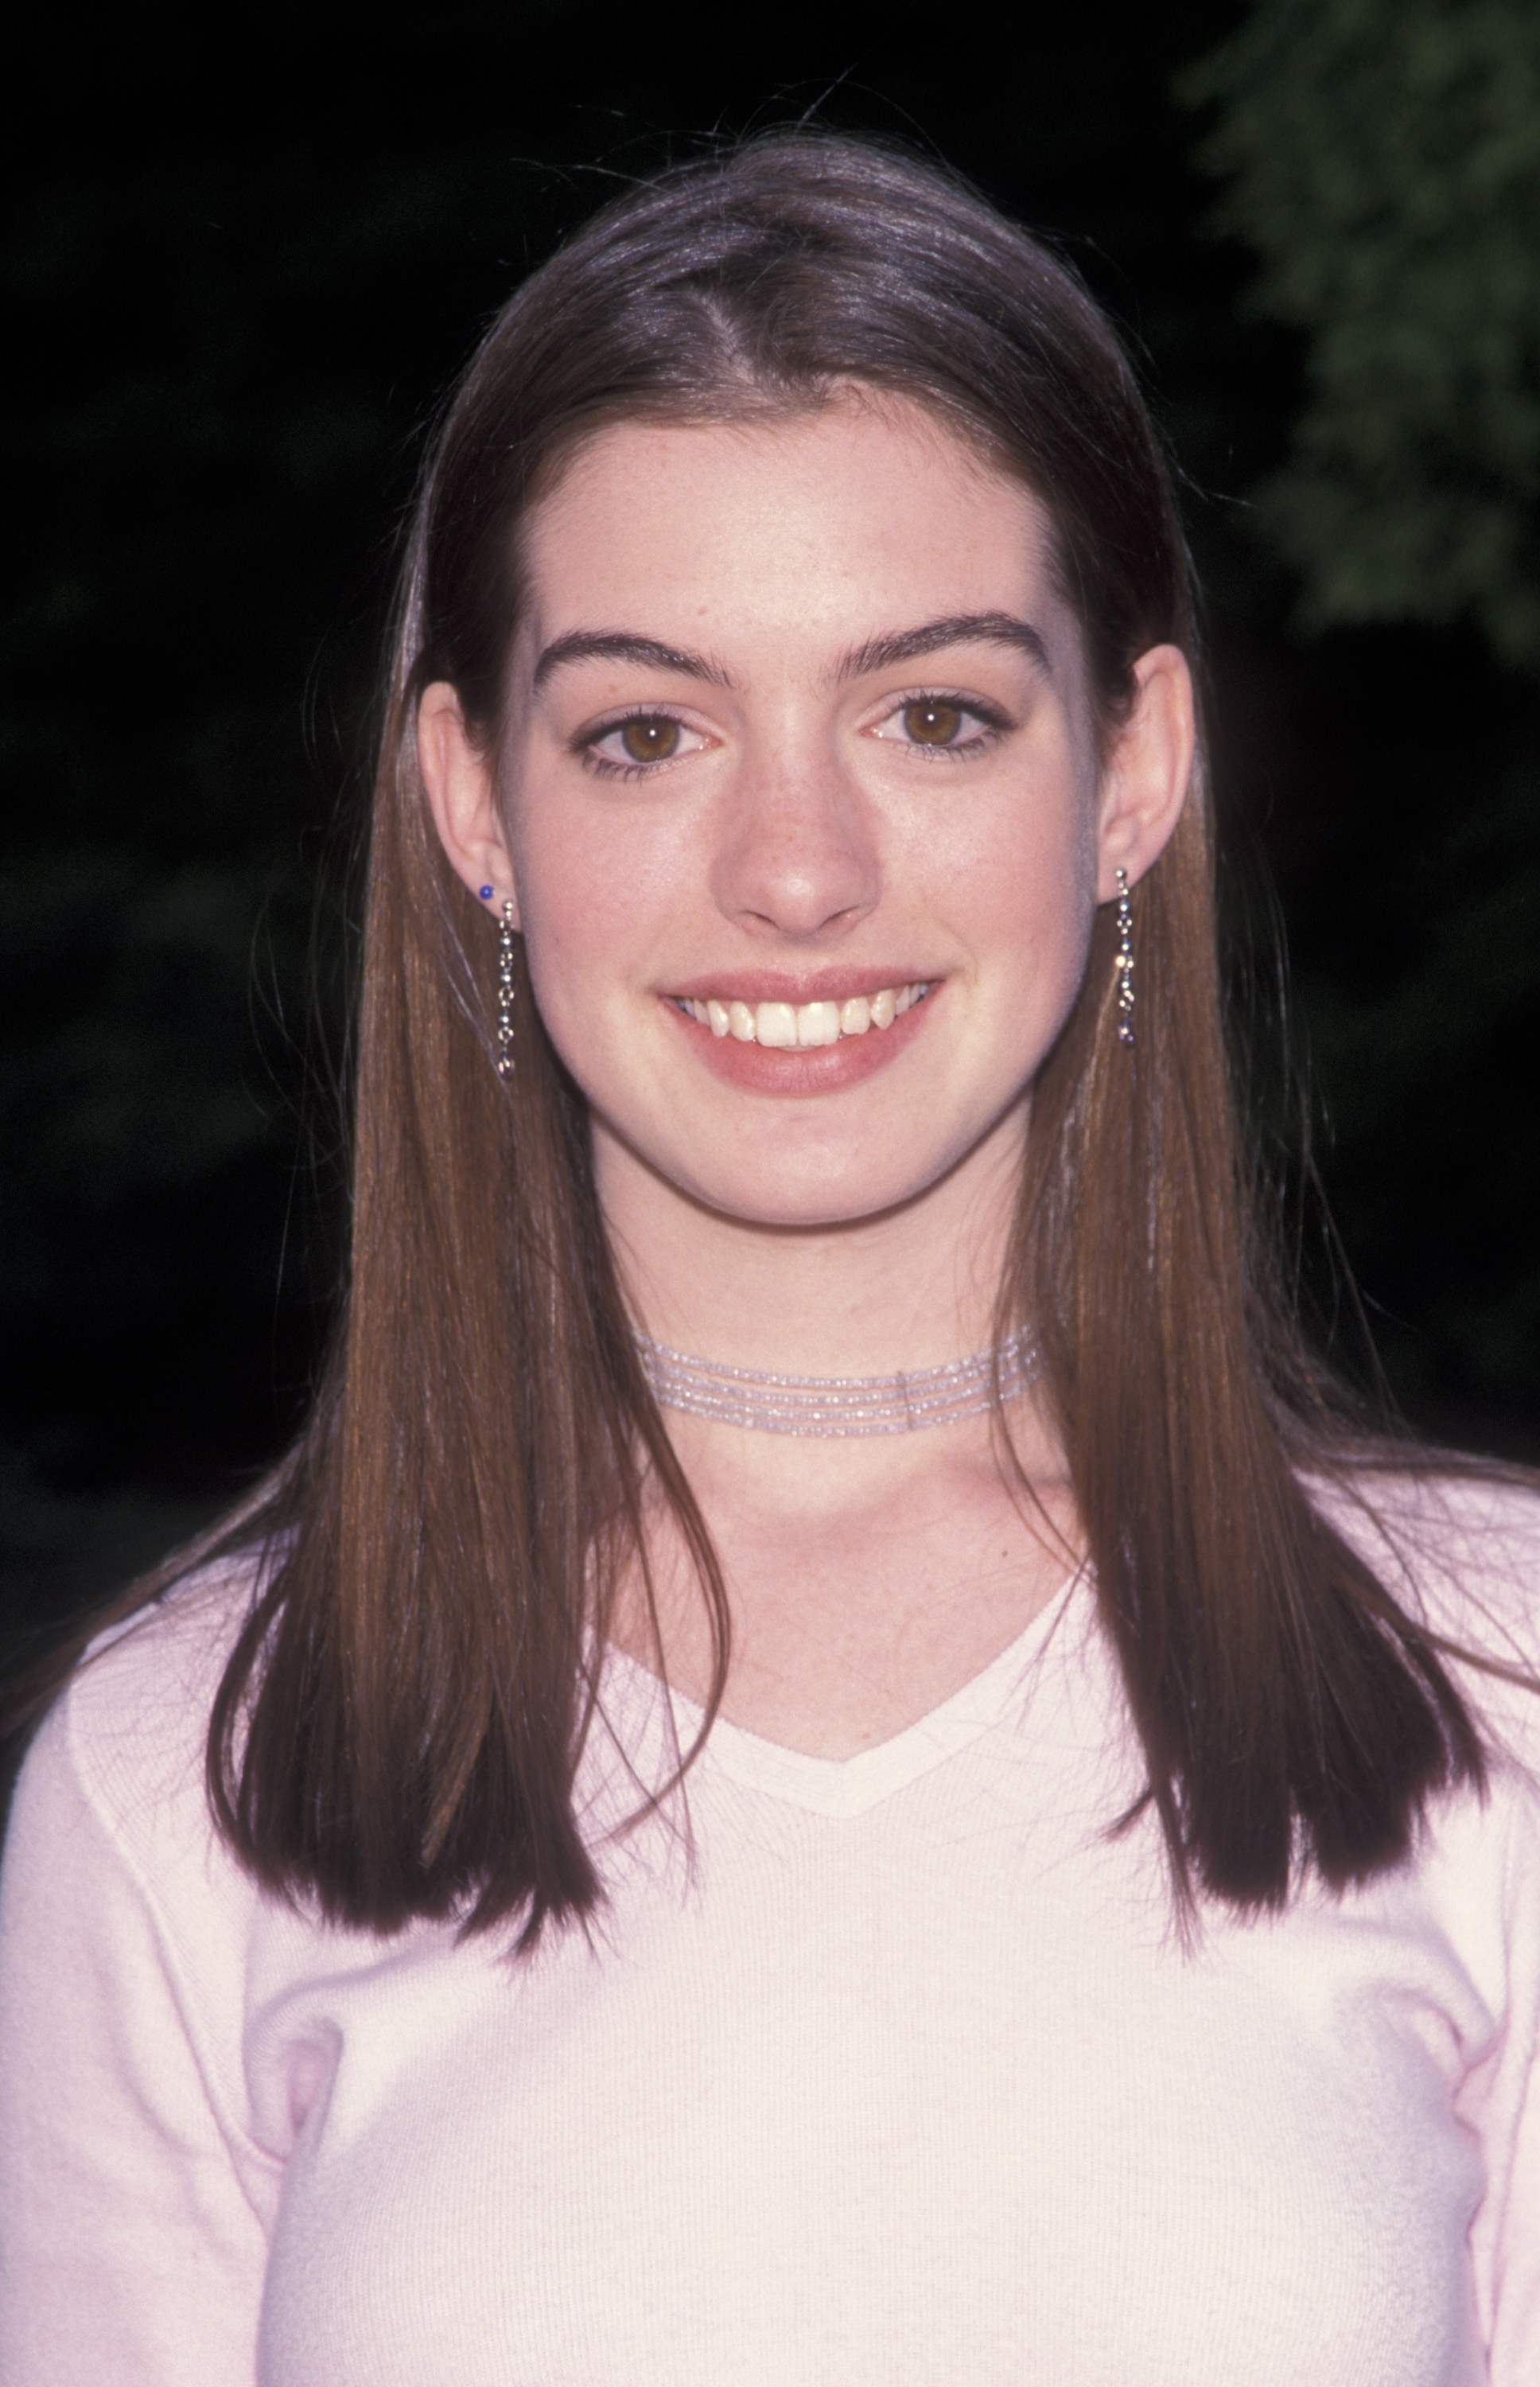 Anne Hathaway Inadvertently Exposed A Sad Reality For Girls Everywhere